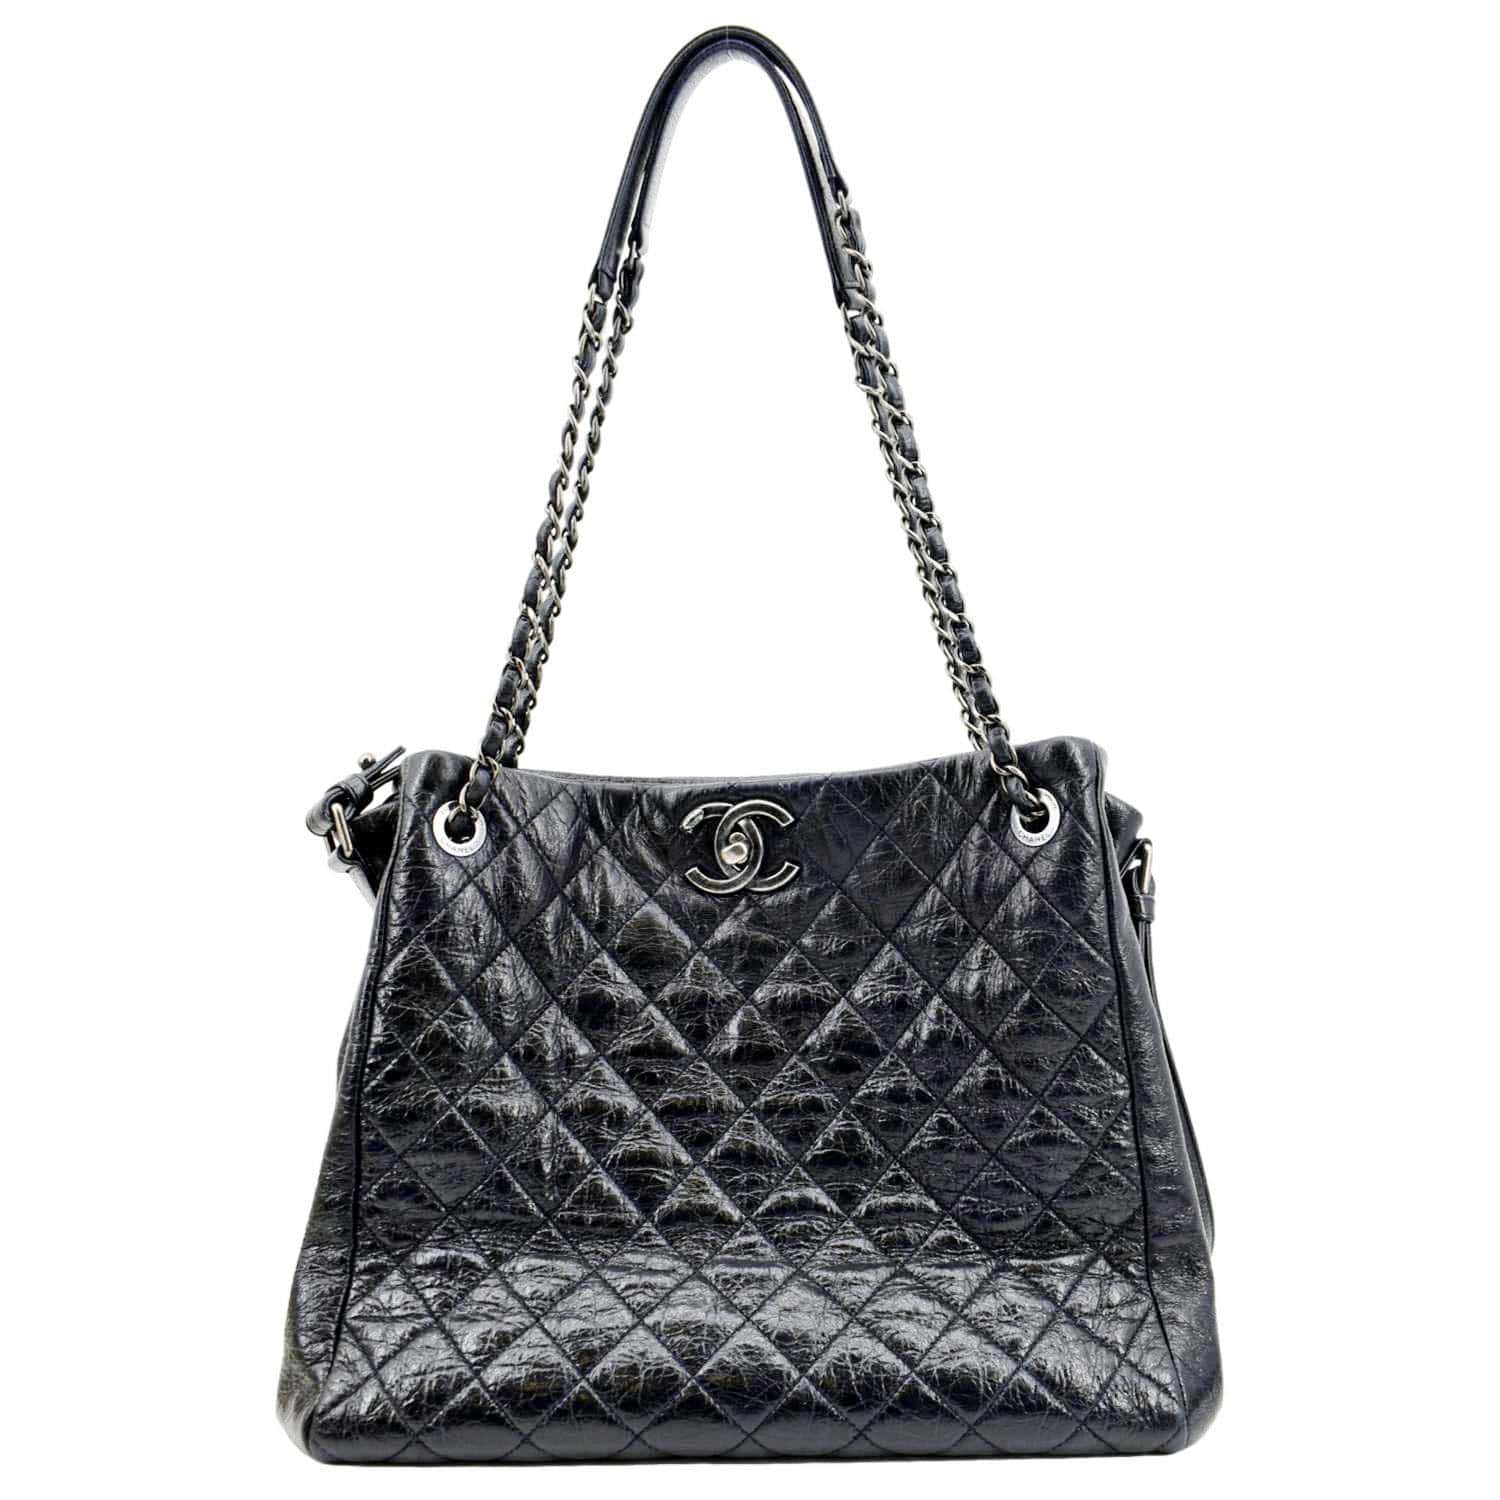 CHANEL, Bags, Chanel Coco Cabas Xl Charcoalblack Caviar Leather Tote With Silver  Hardware